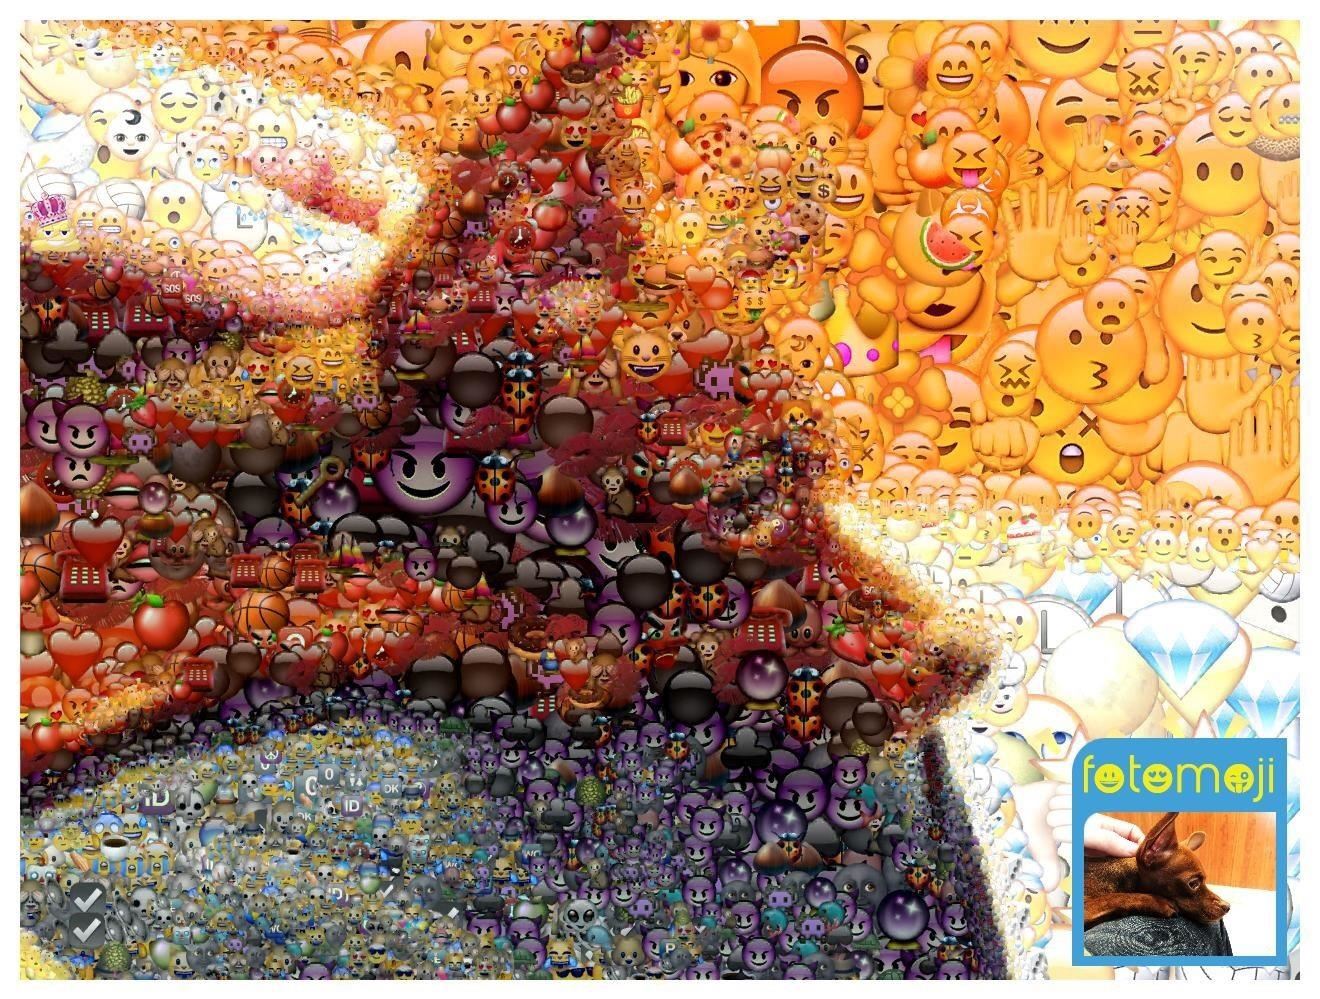 Create Emoji Art from Your Photos Using This Fun Tool